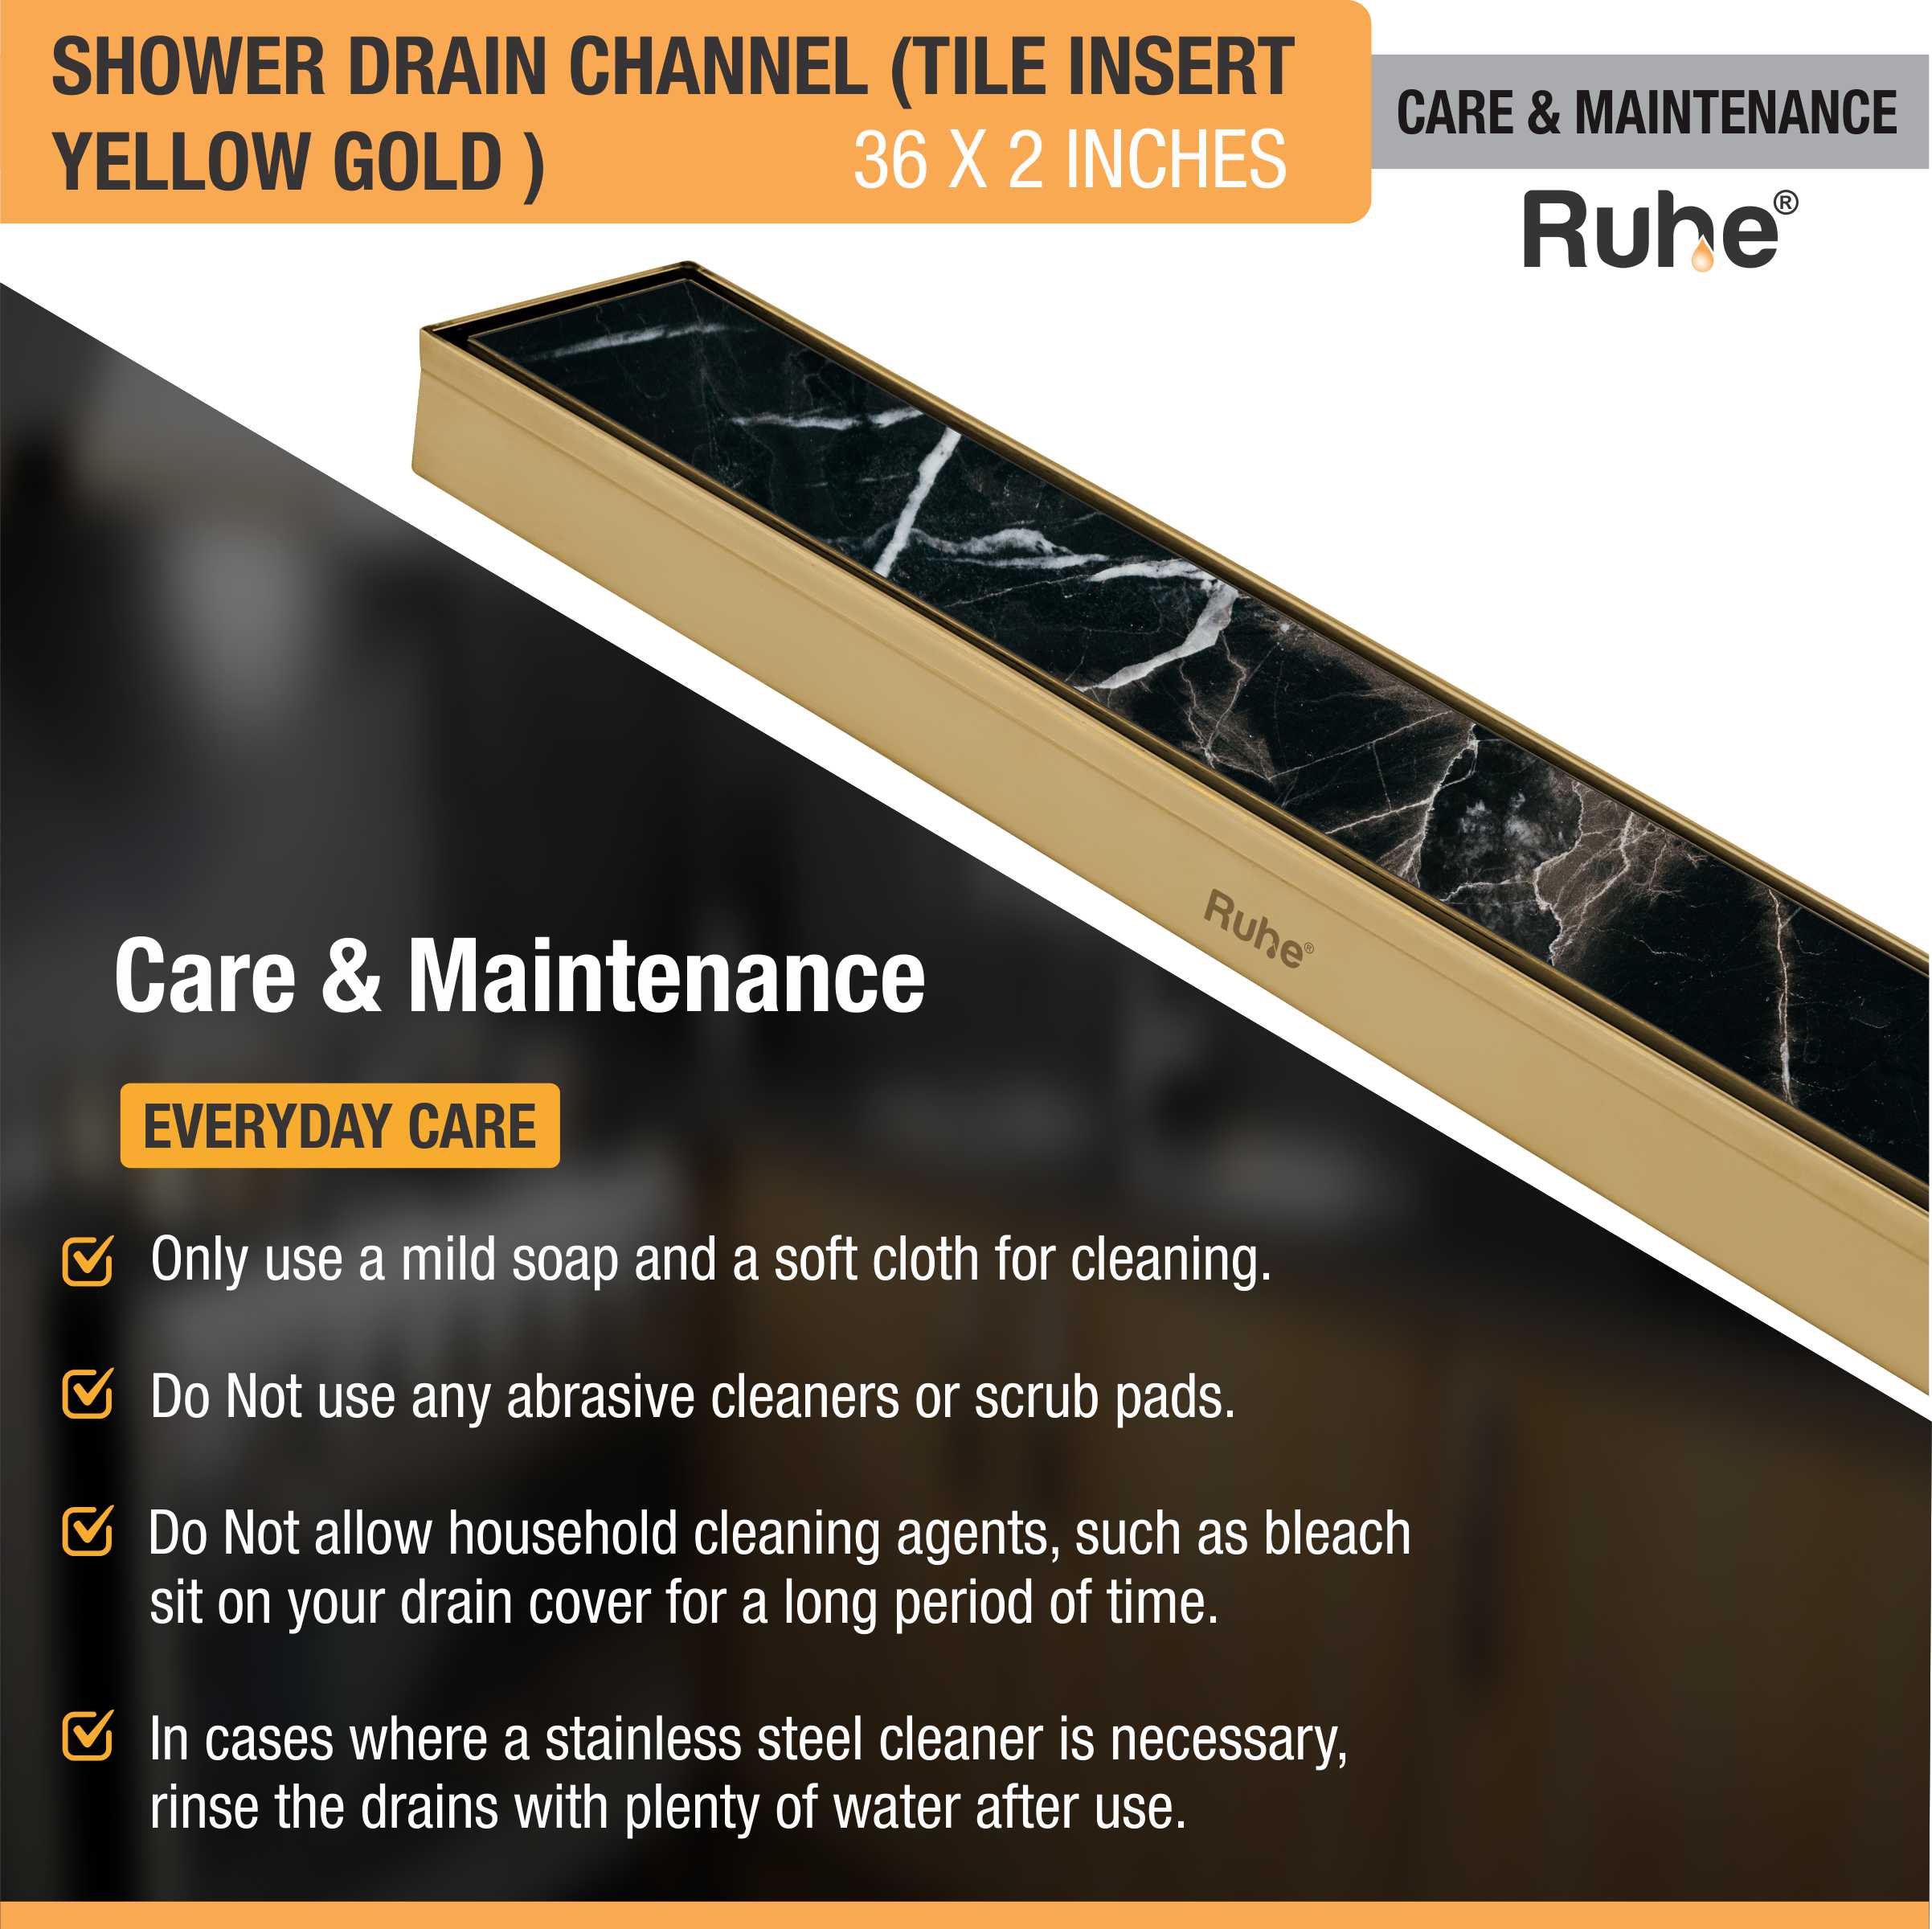 Tile Insert Shower Drain Channel (36 x 2 Inches) YELLOW GOLD care and maintenance